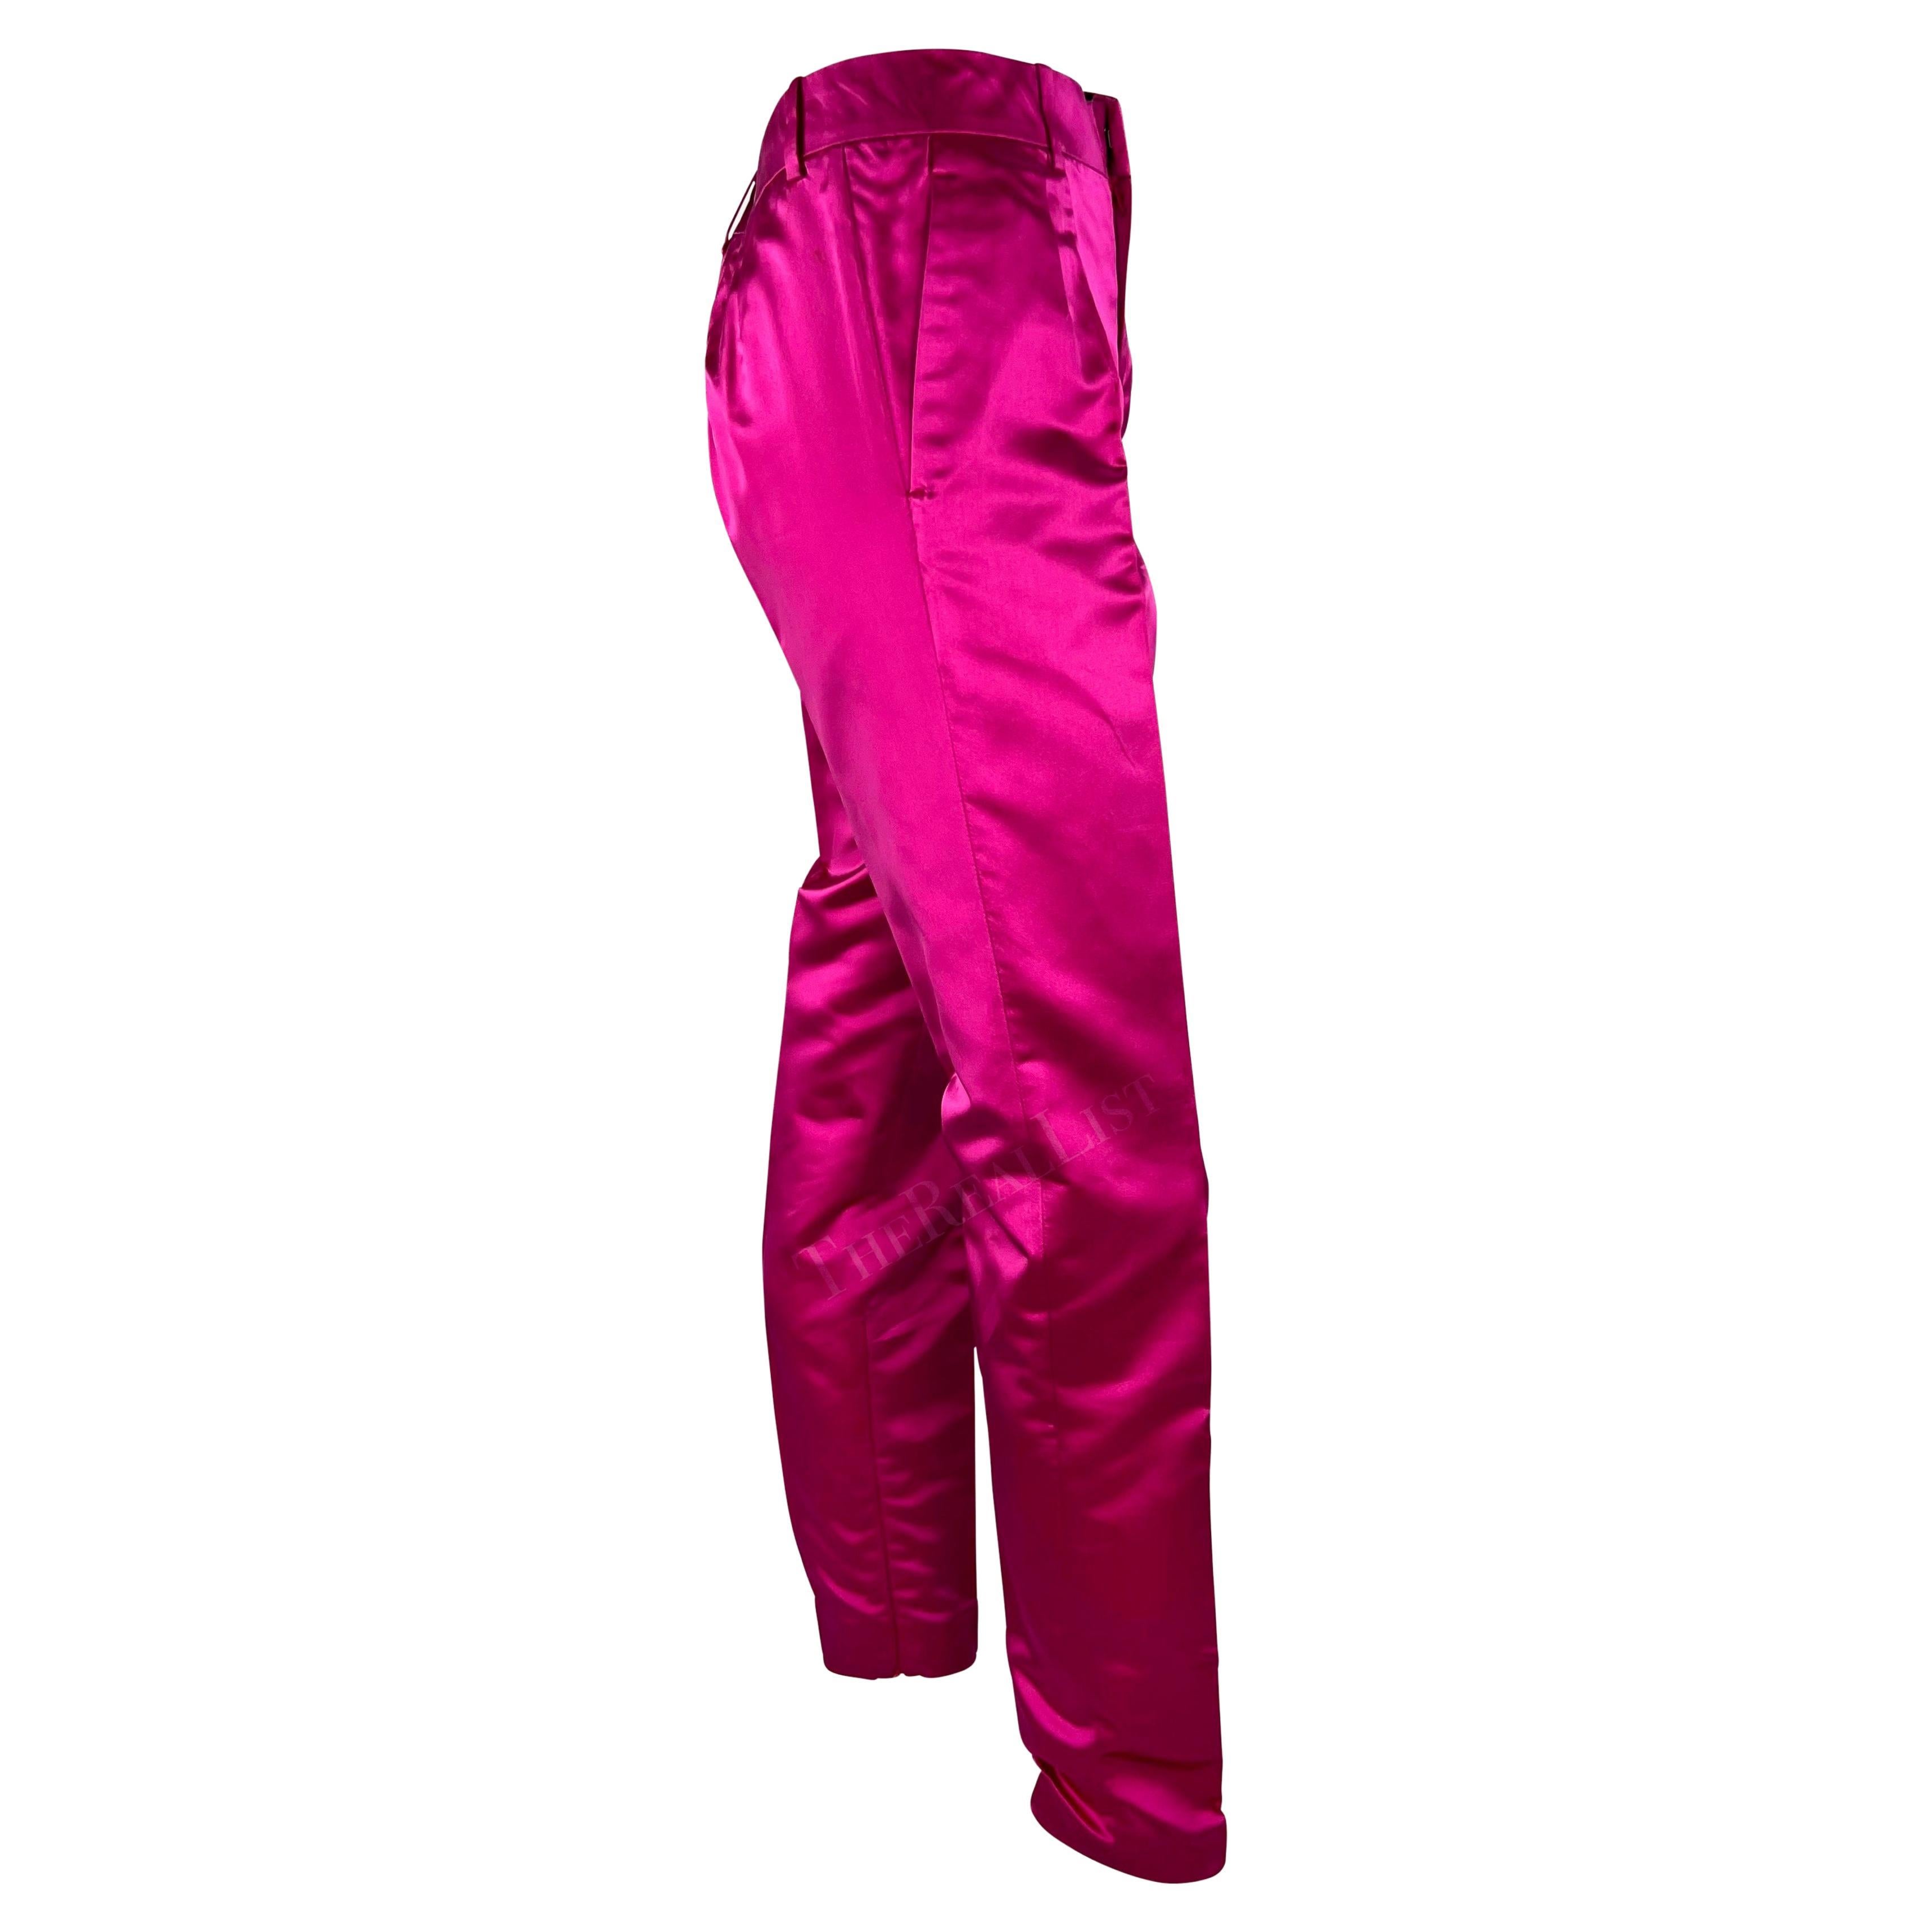 S/S 2001 Gucci by Tom Ford Runway Hot Pink Satin Silk Blend Tapered Pants For Sale 3